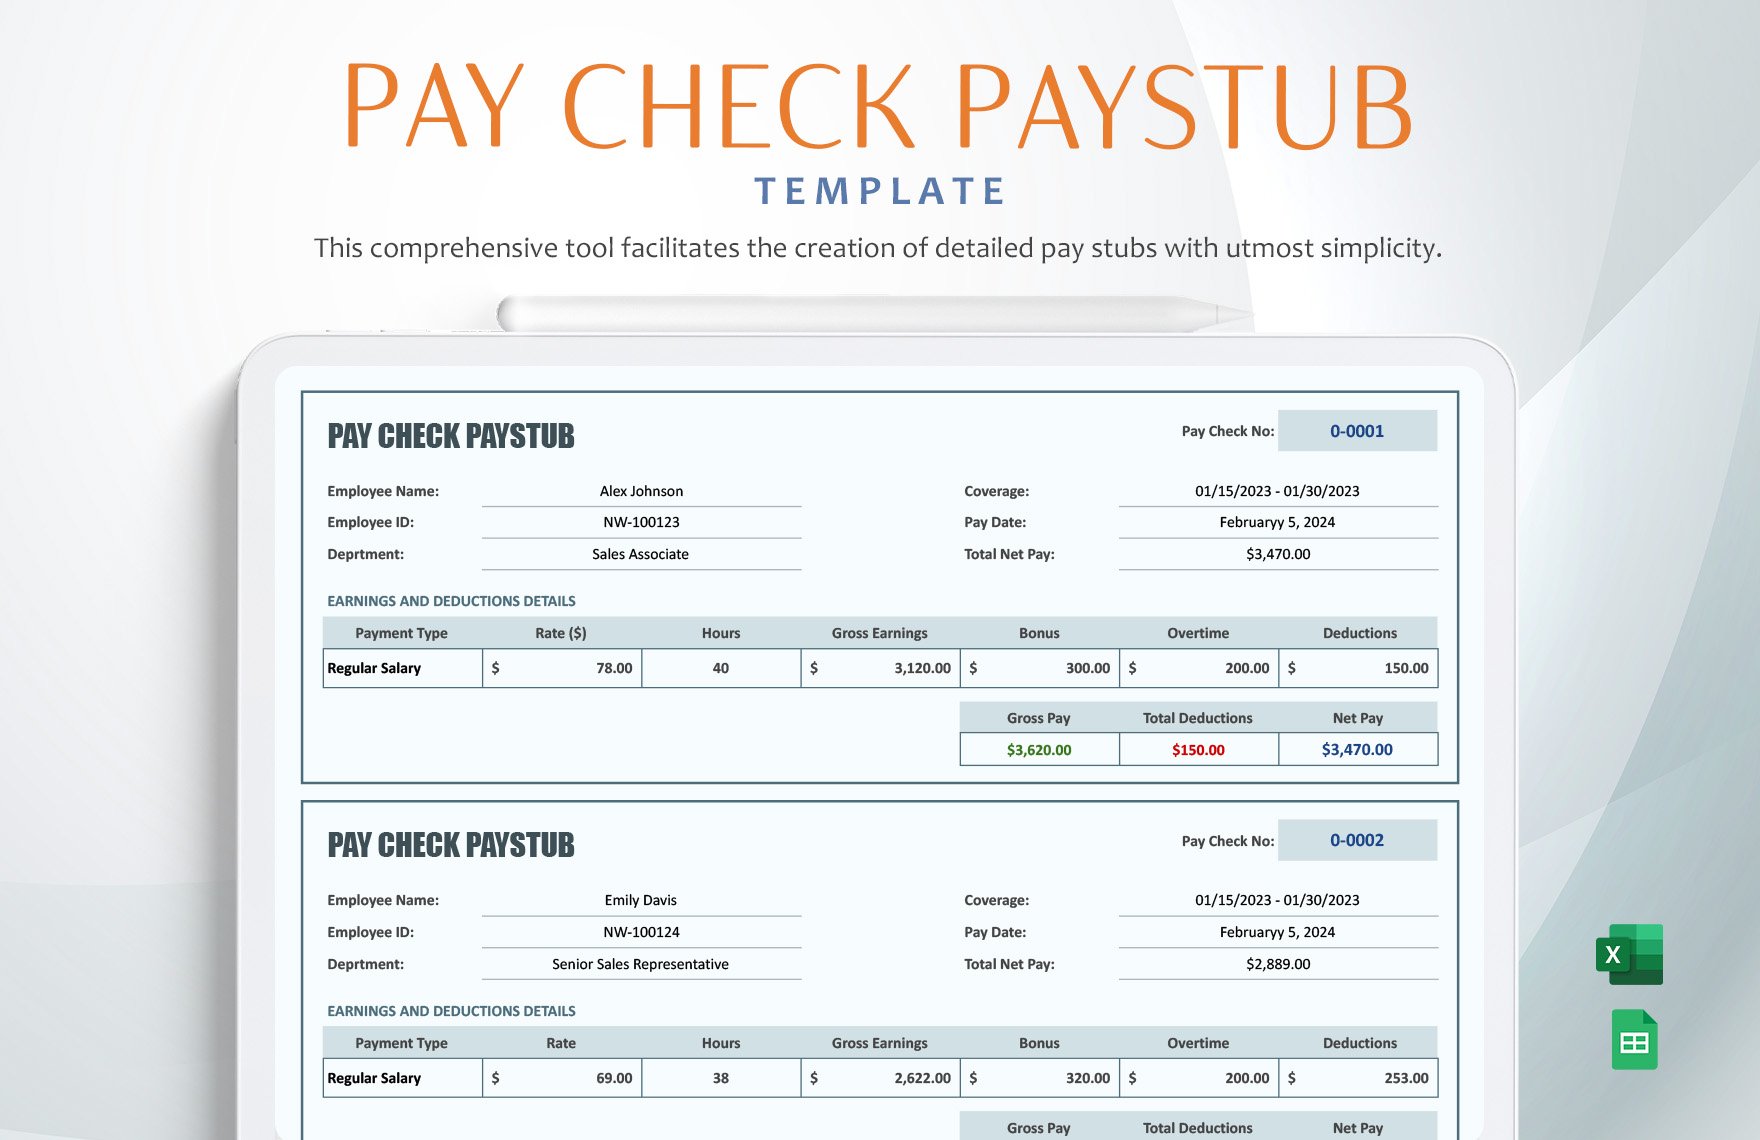 Pay Check Paystub Template